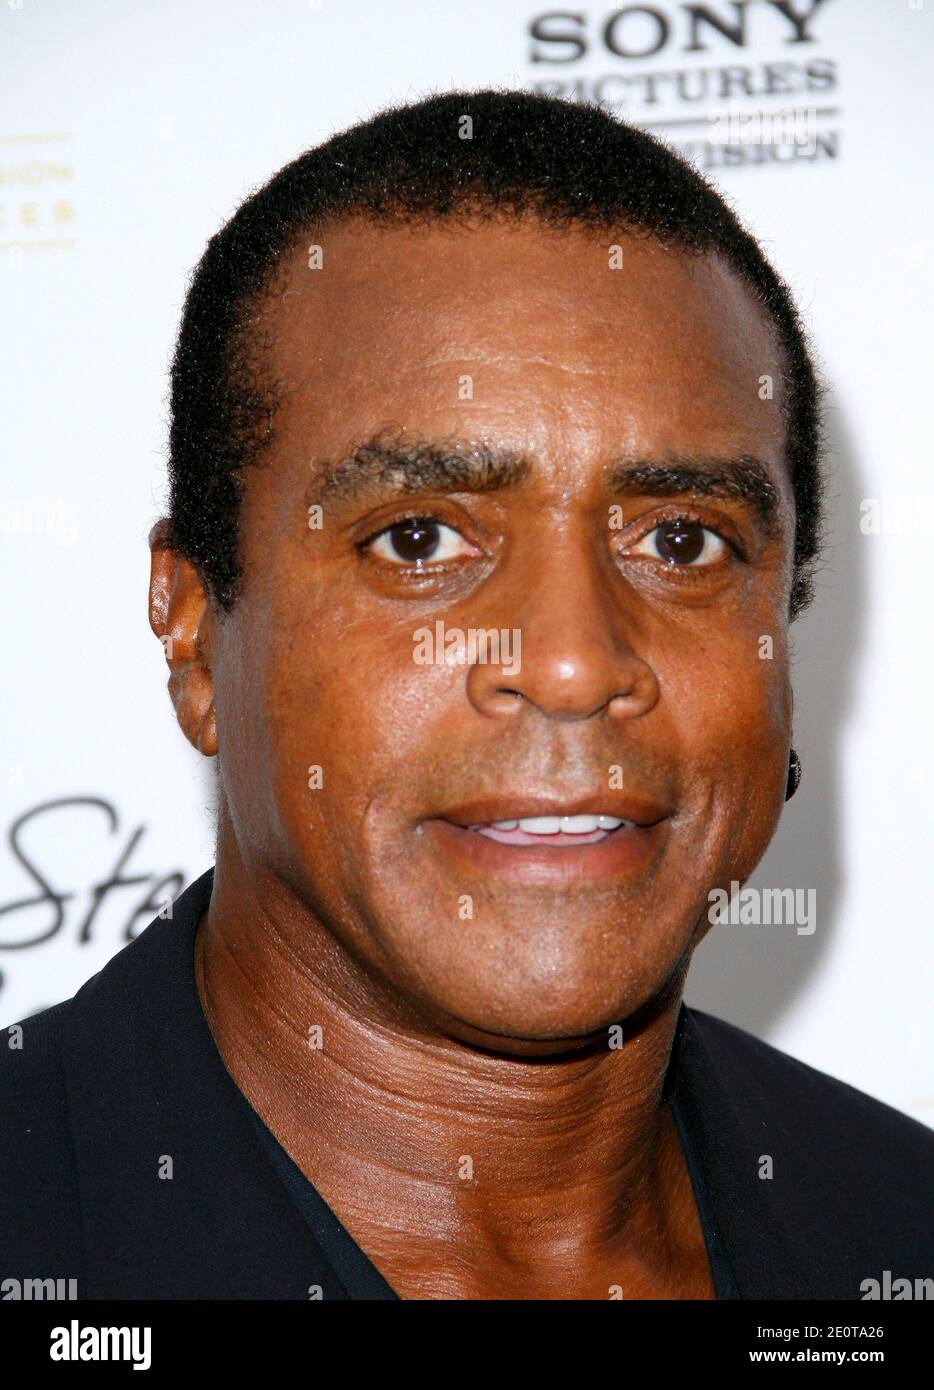 Ahmad Rashad attends the Steel Magnolias Premiere at the Paris Theater in New York City, NY, USA, on October 3, 2012. Photo by Donna Ward/ABACAPRESS.COM Stock Photo